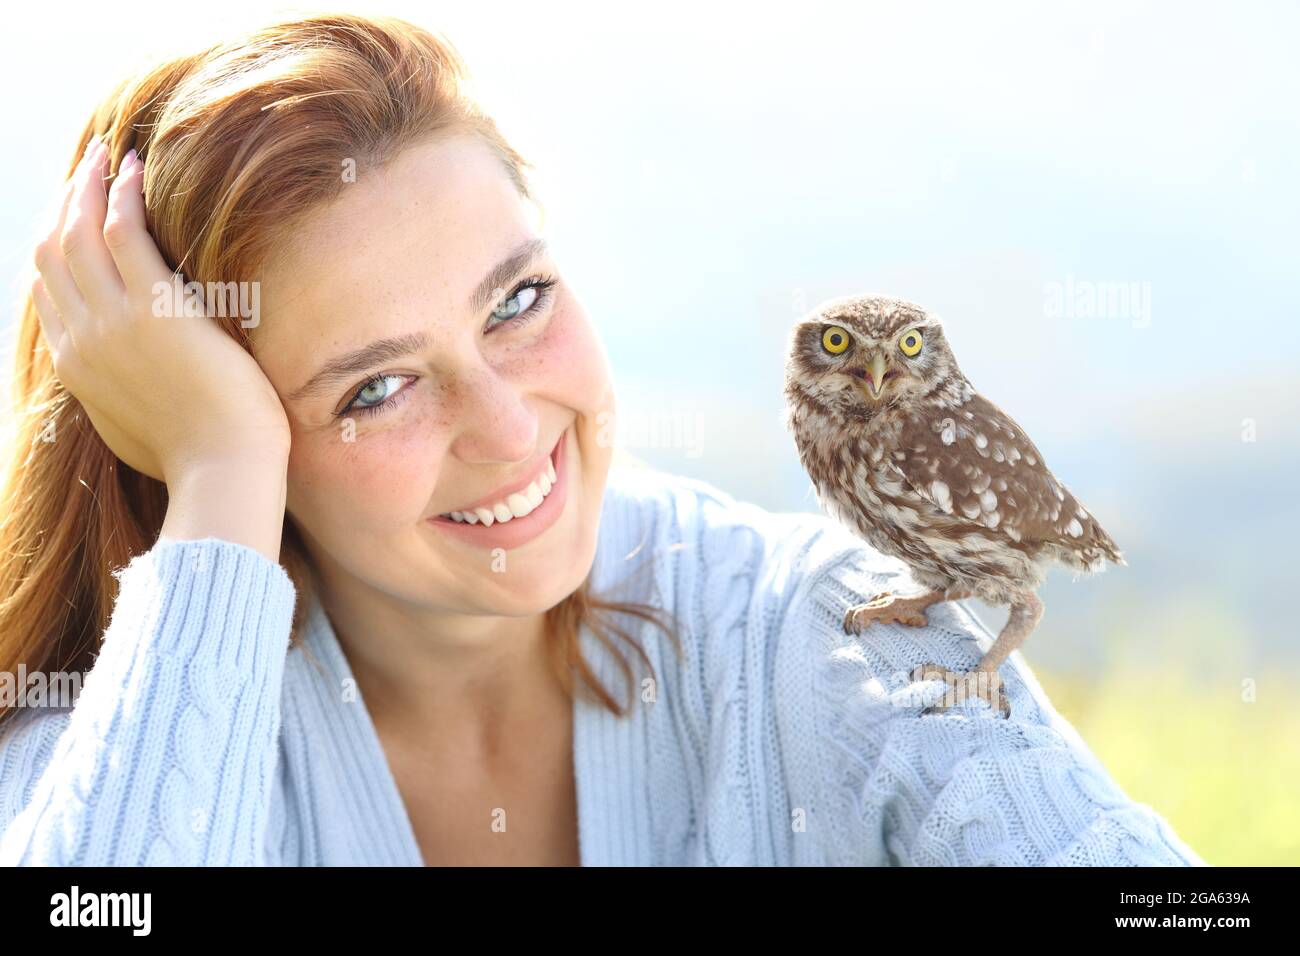 Beautiful woman with blue eyes posing with an owlet looking at camera Stock Photo